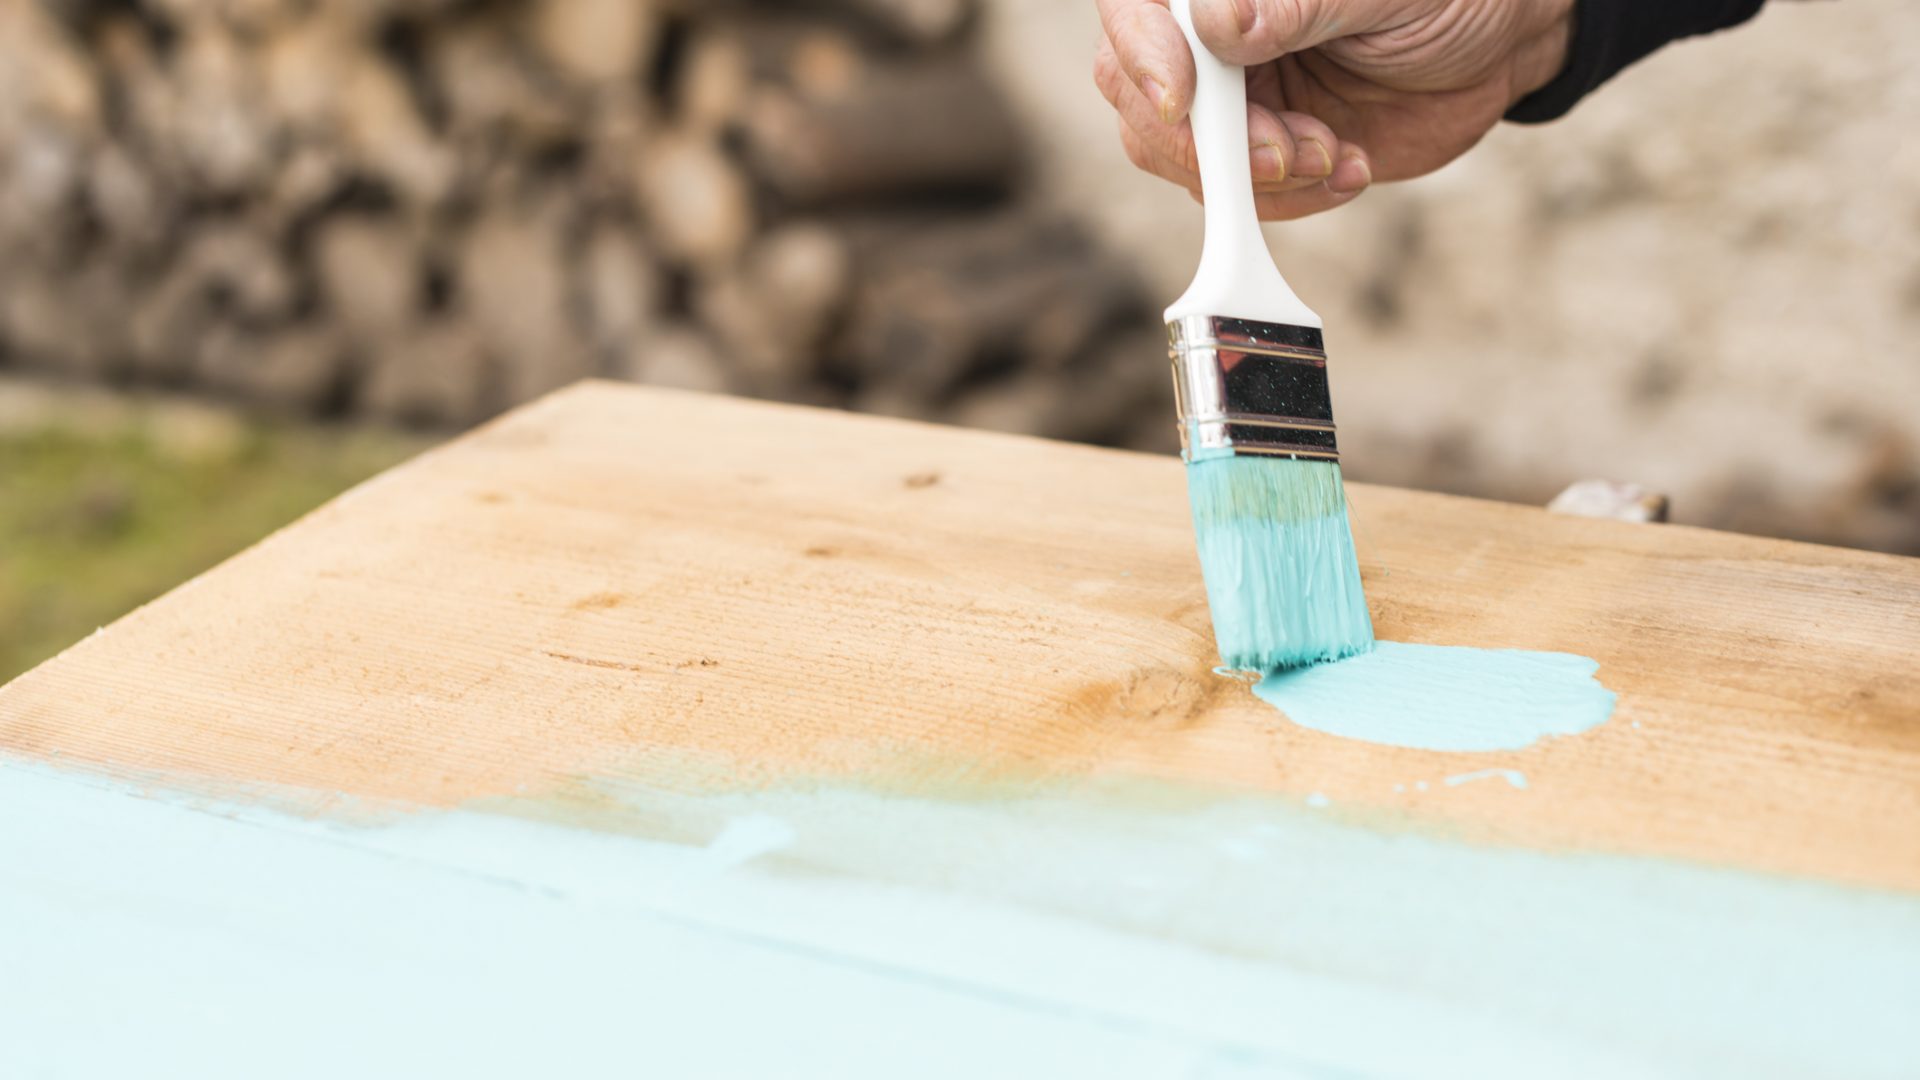 Can You Use Chalk Paint For Outdoor Furniture?